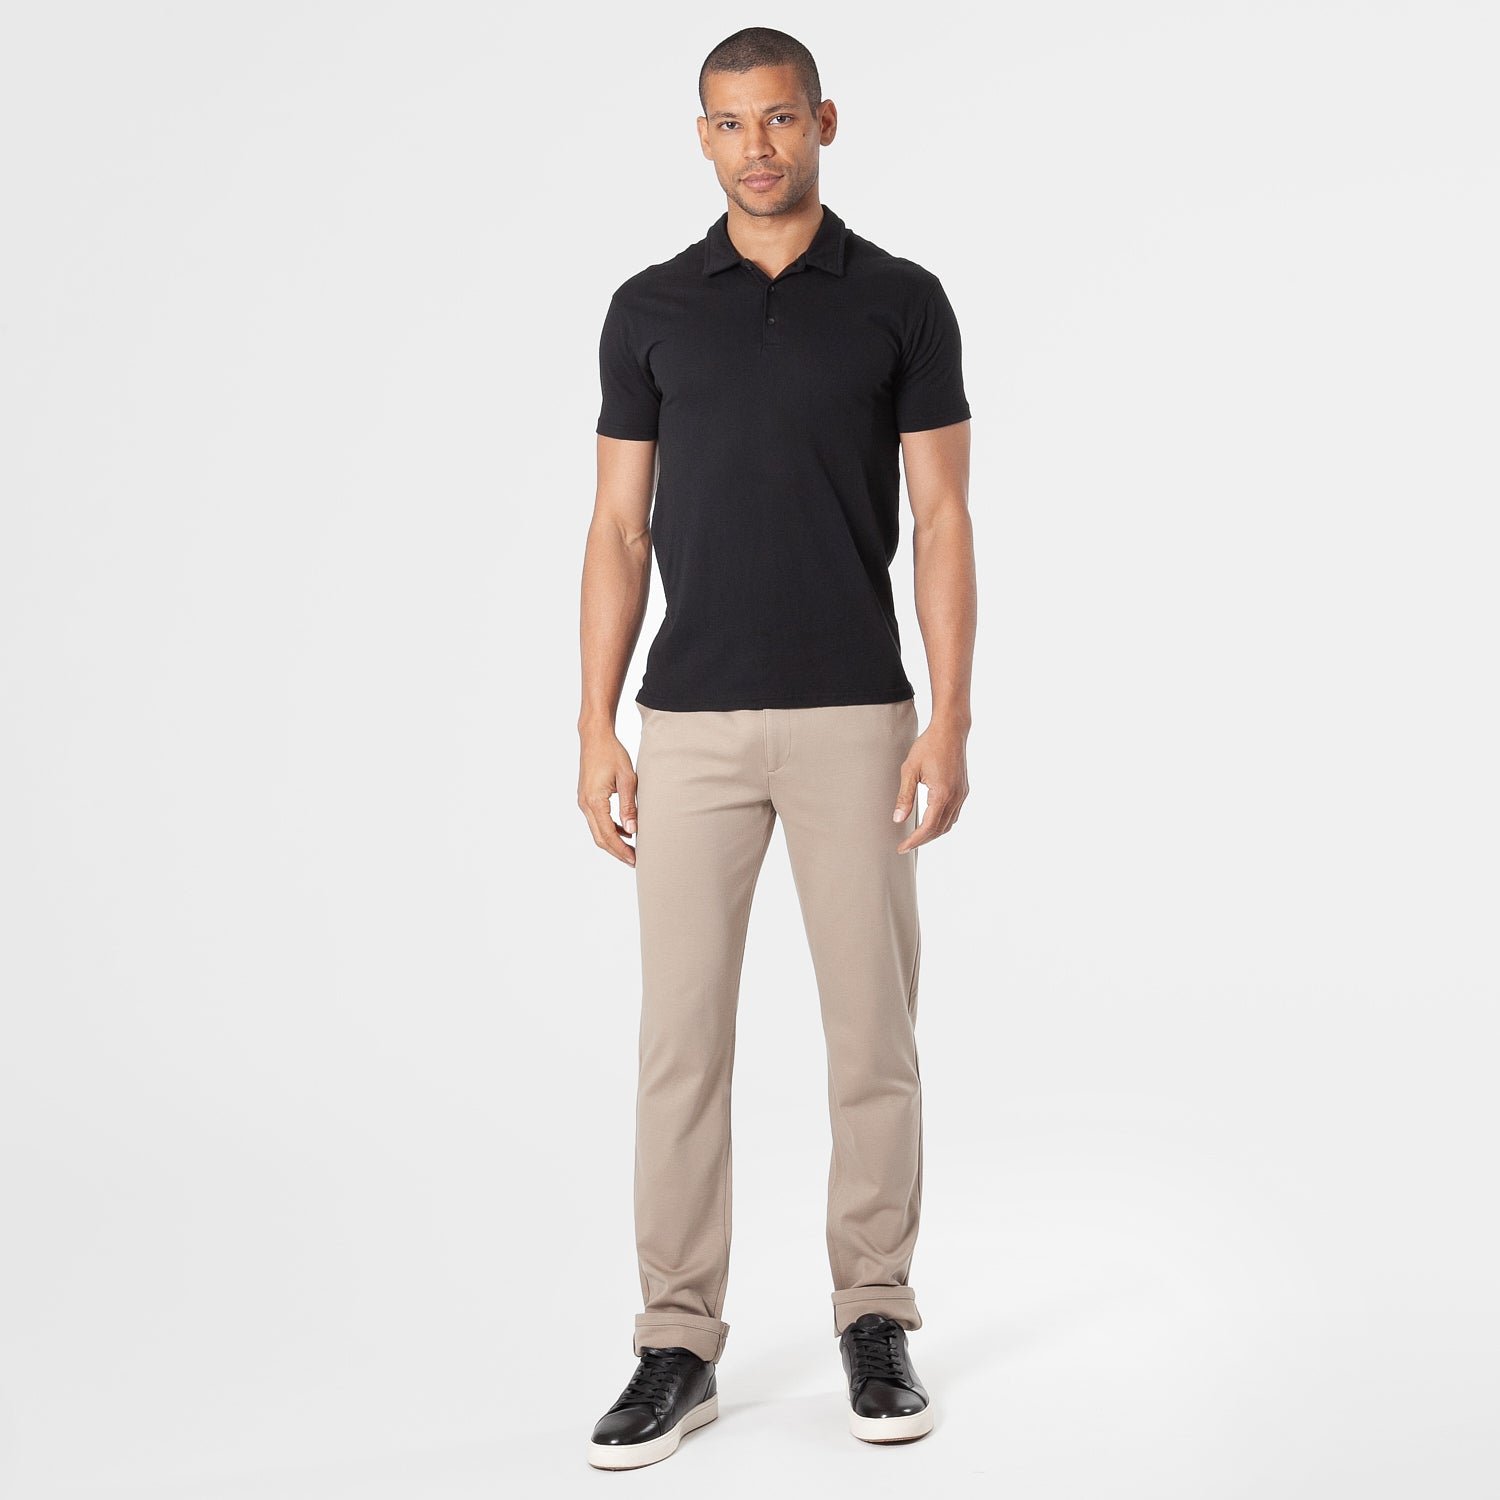 The Everyday Chino Pants 2-Pack